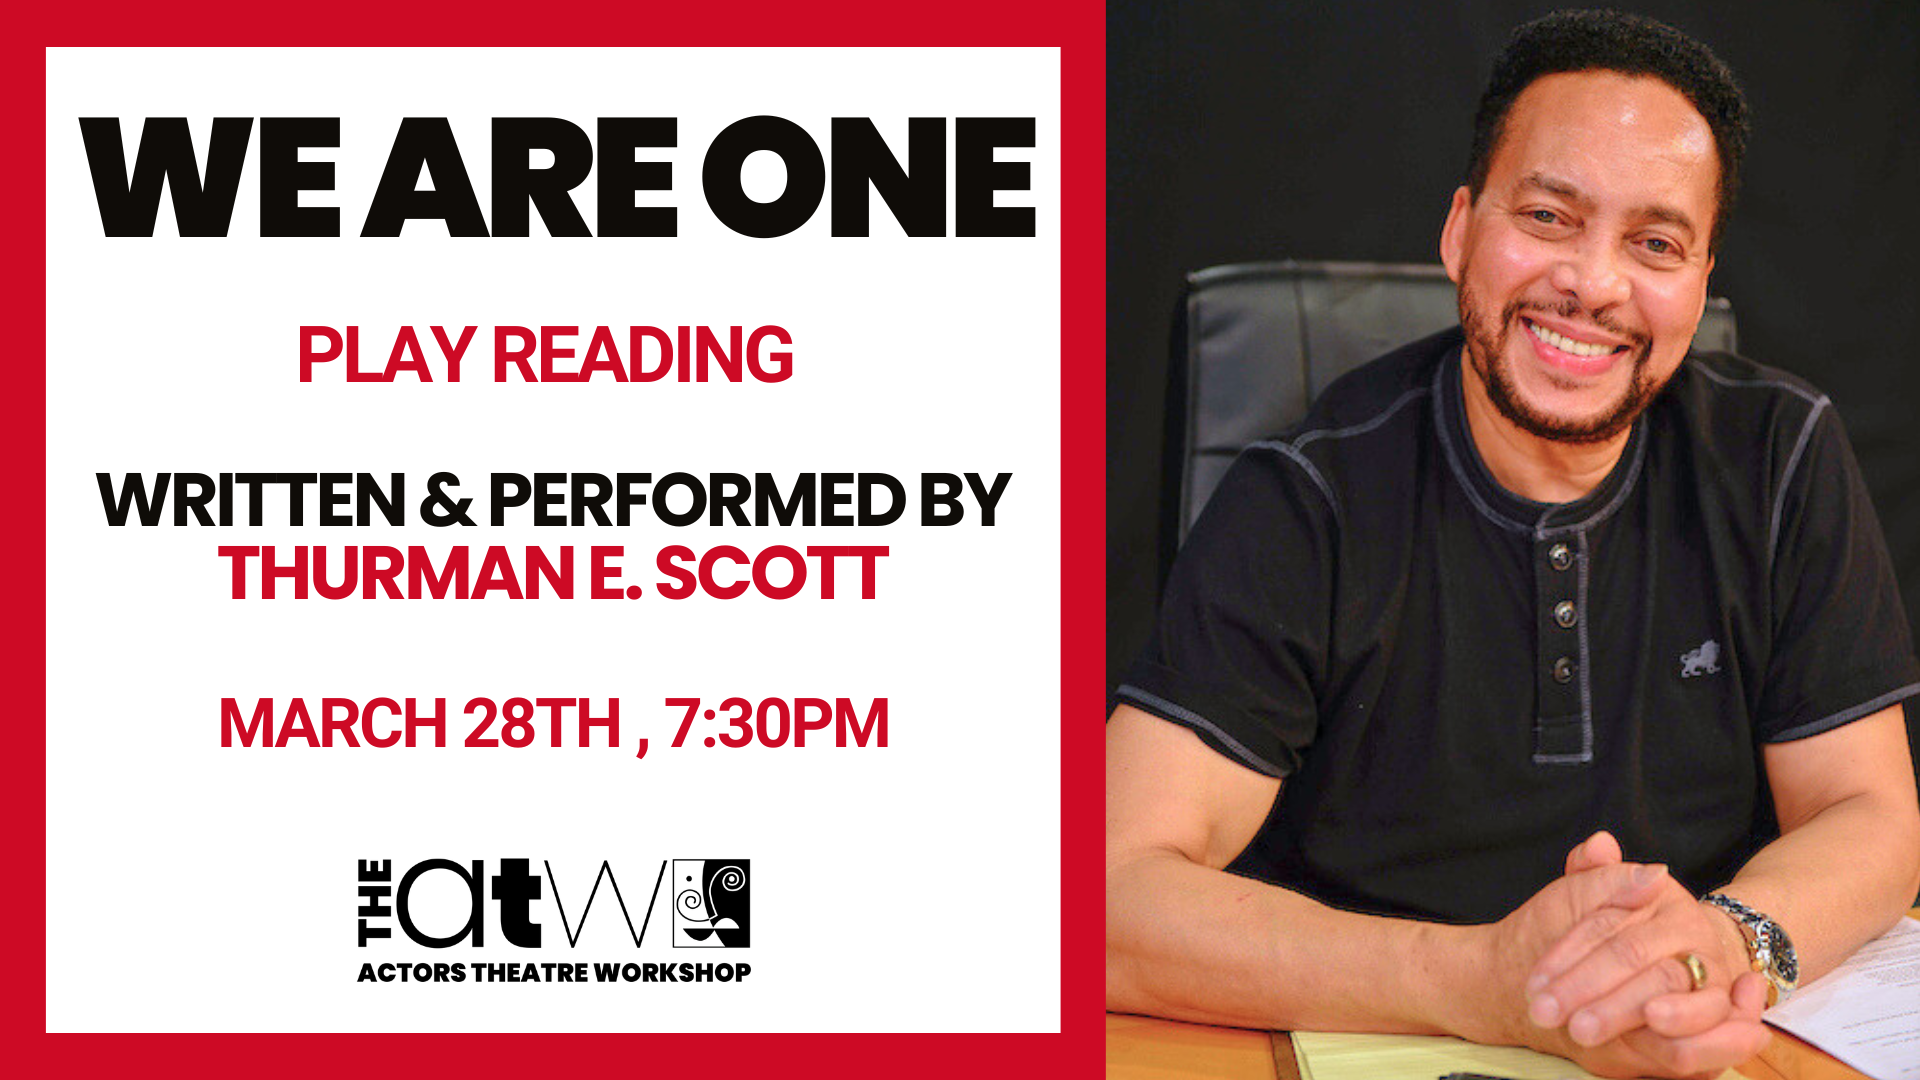 We Are One Play Reading Performed by Thurman E. Scott March 28th